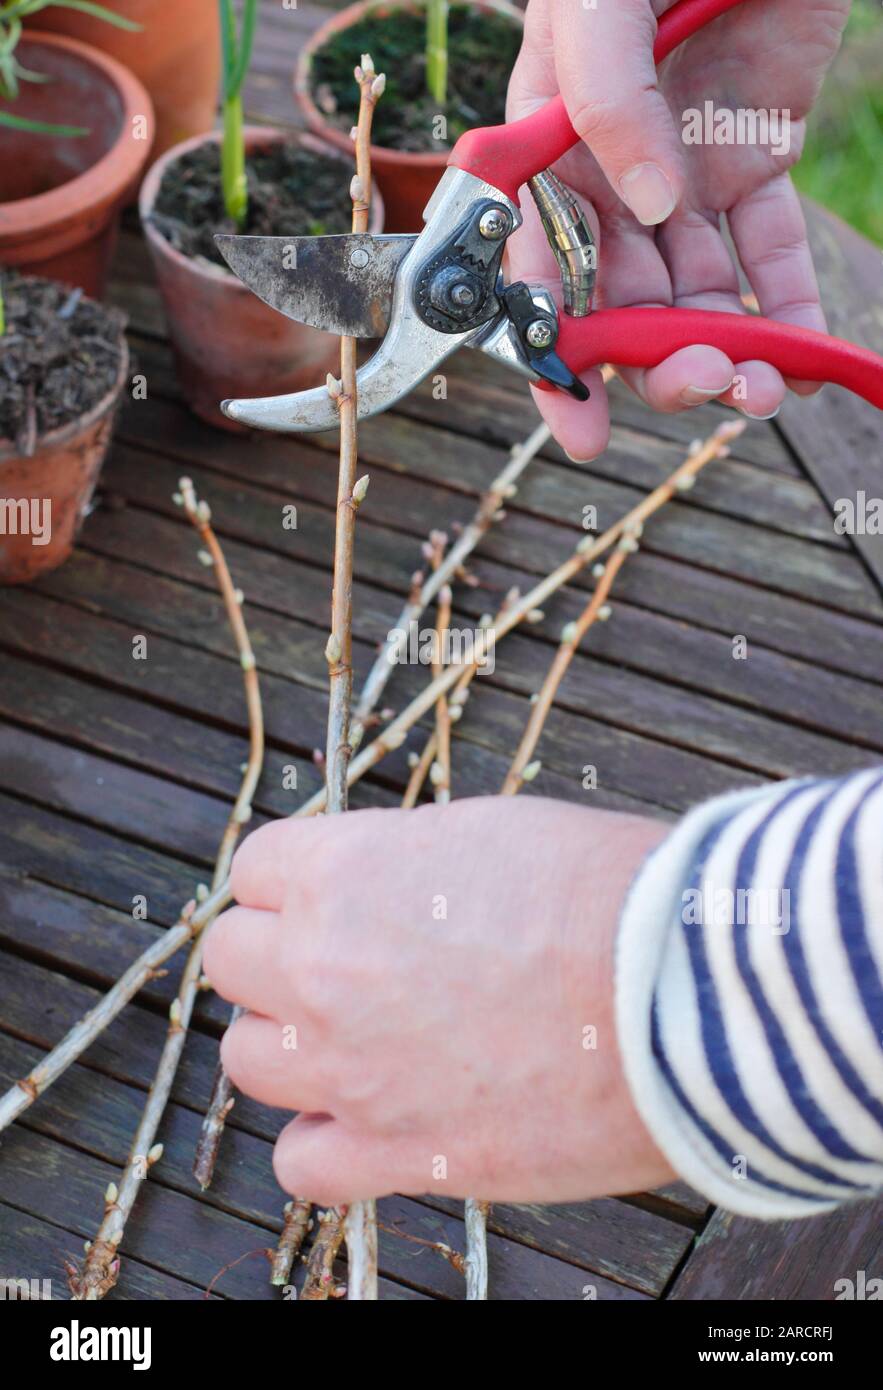 Propagating Ribes nigrum. Tidying up hardwood blackcurrant cuttings with secateurs before planting. UK Stock Photo